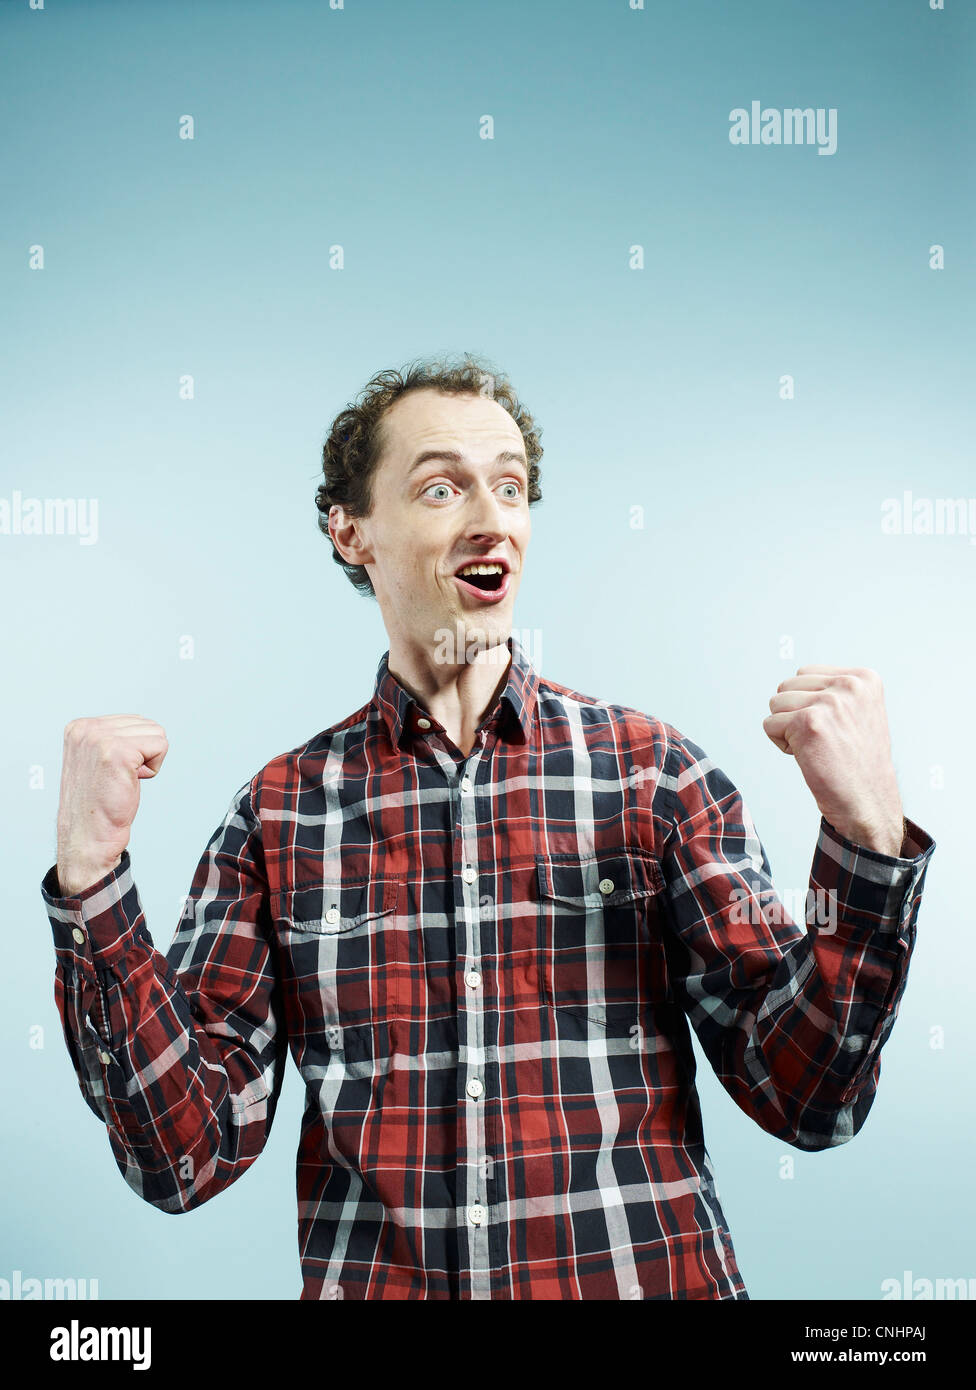 A man with his fists clenched in celebration Stock Photo